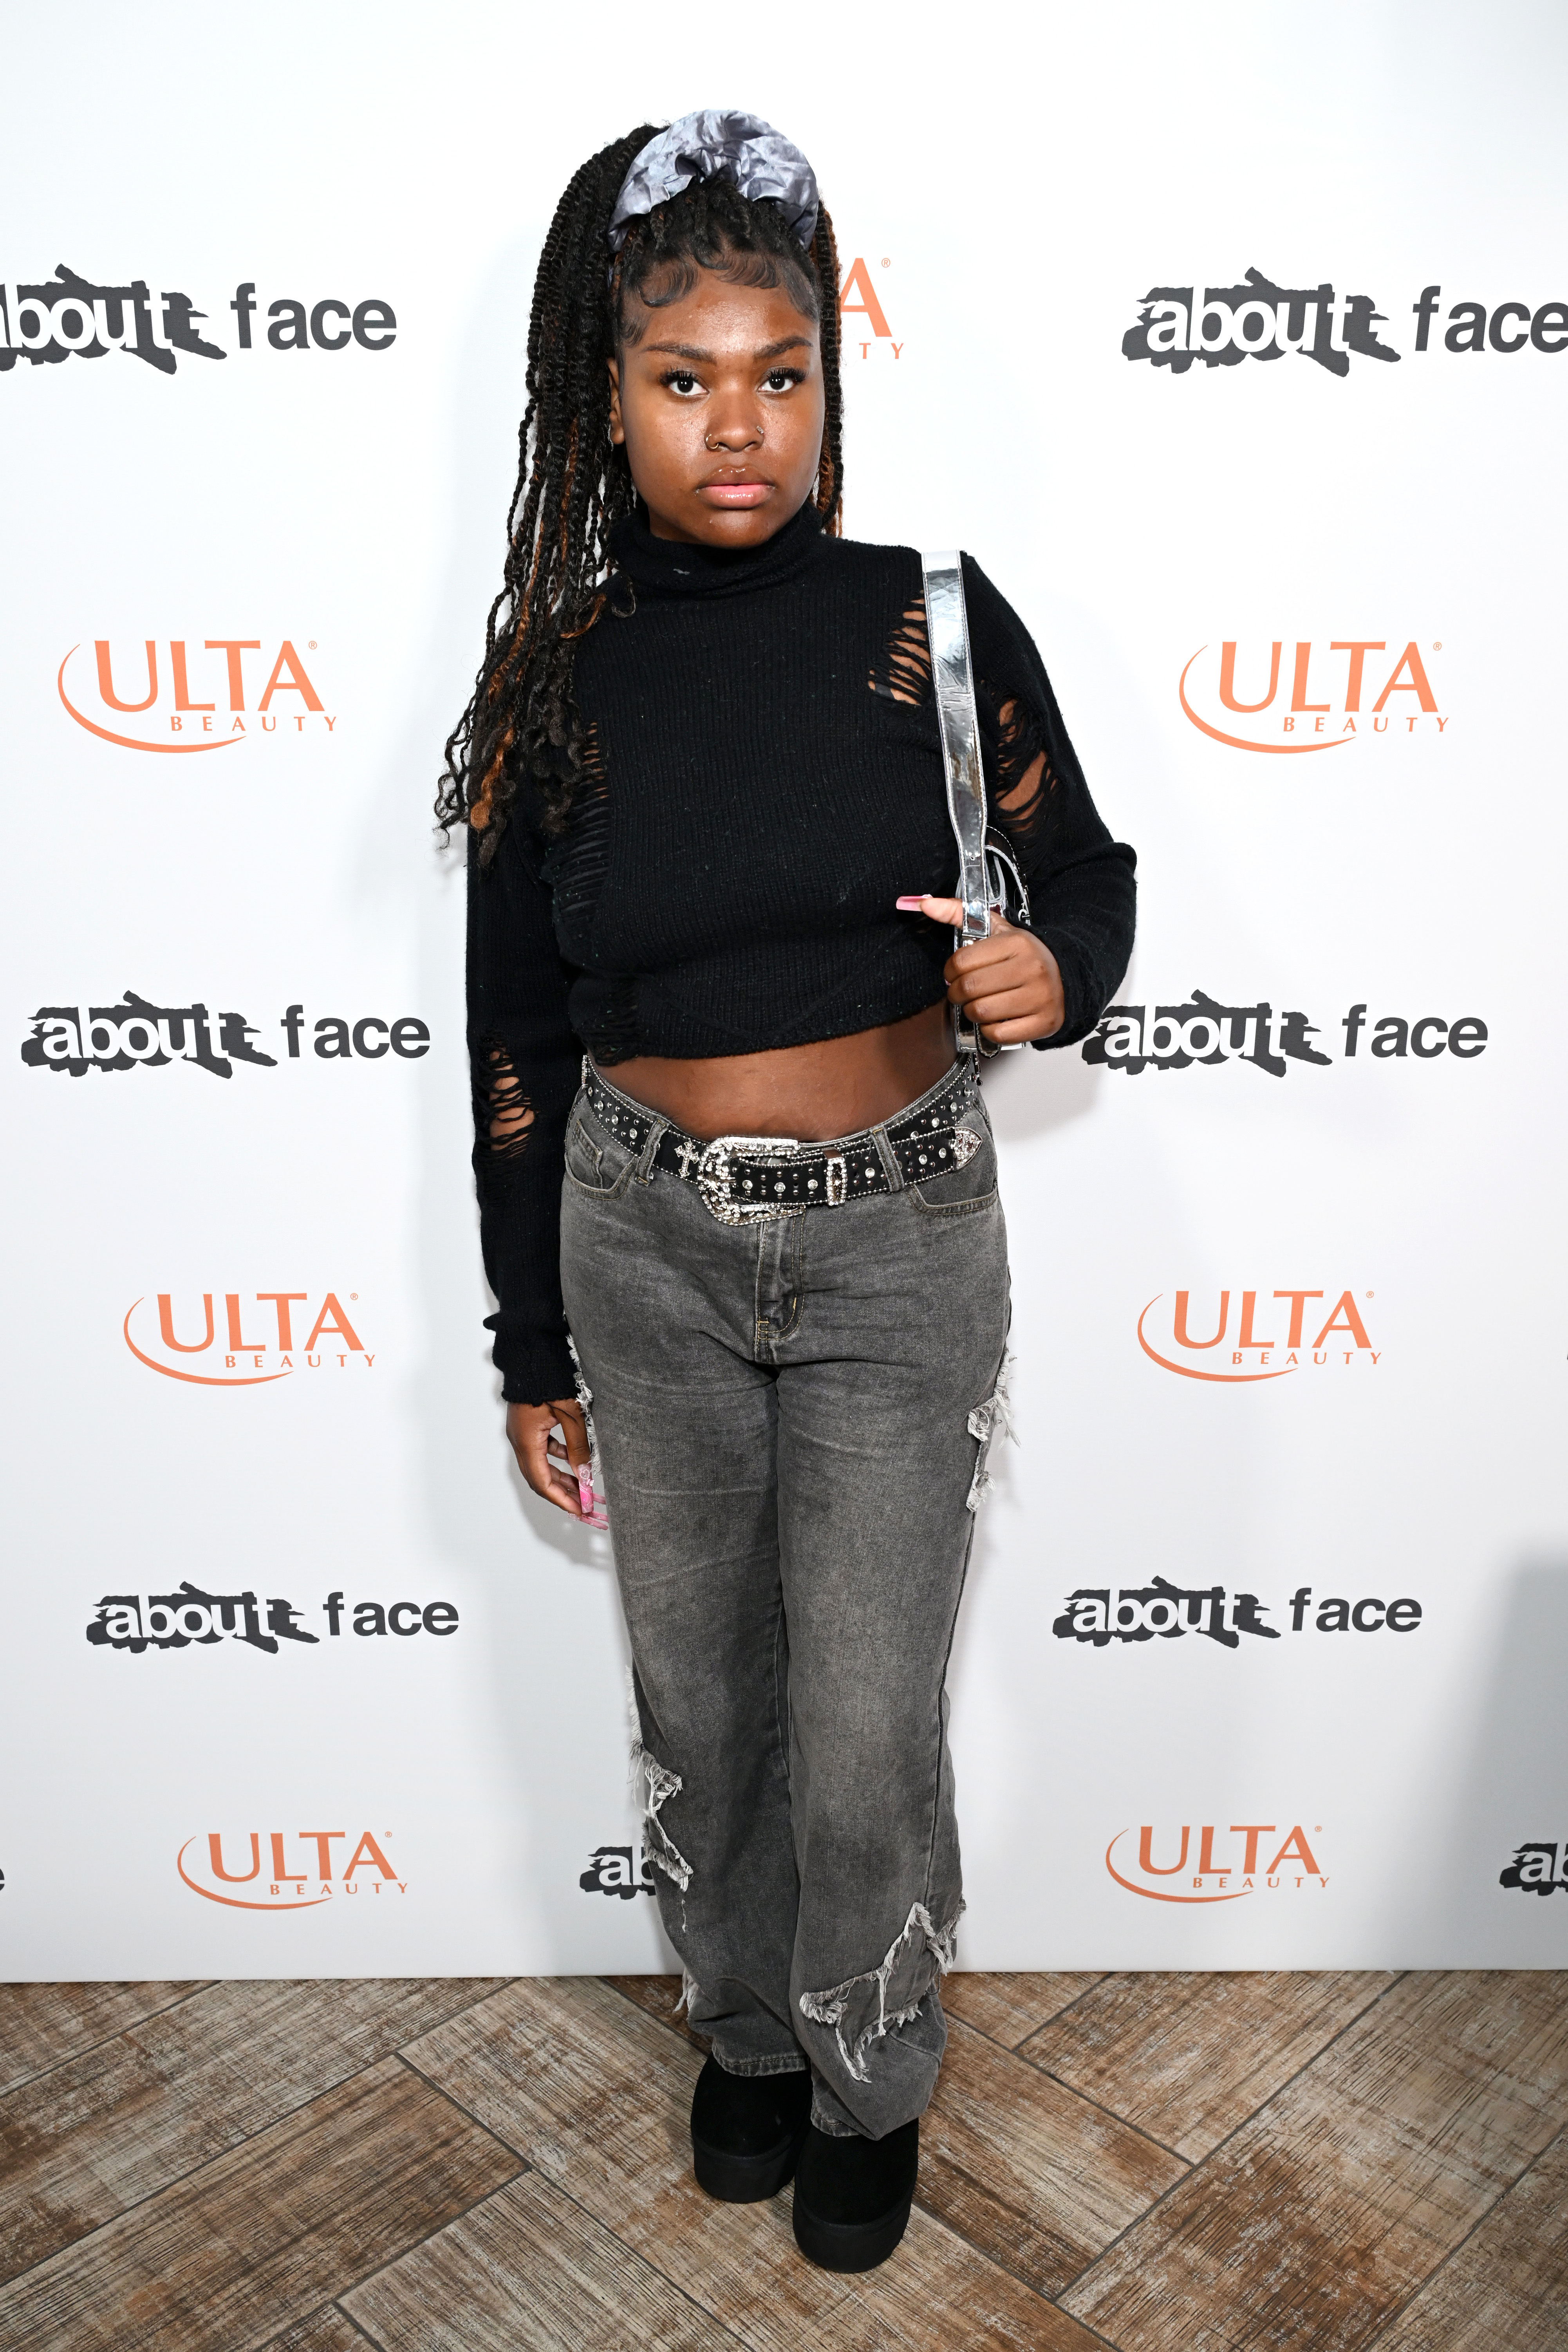 Fannita Leggett attends the about–face Performer Launch Dinner at ADKT LA on January 18, 2024, in Los Angeles, California